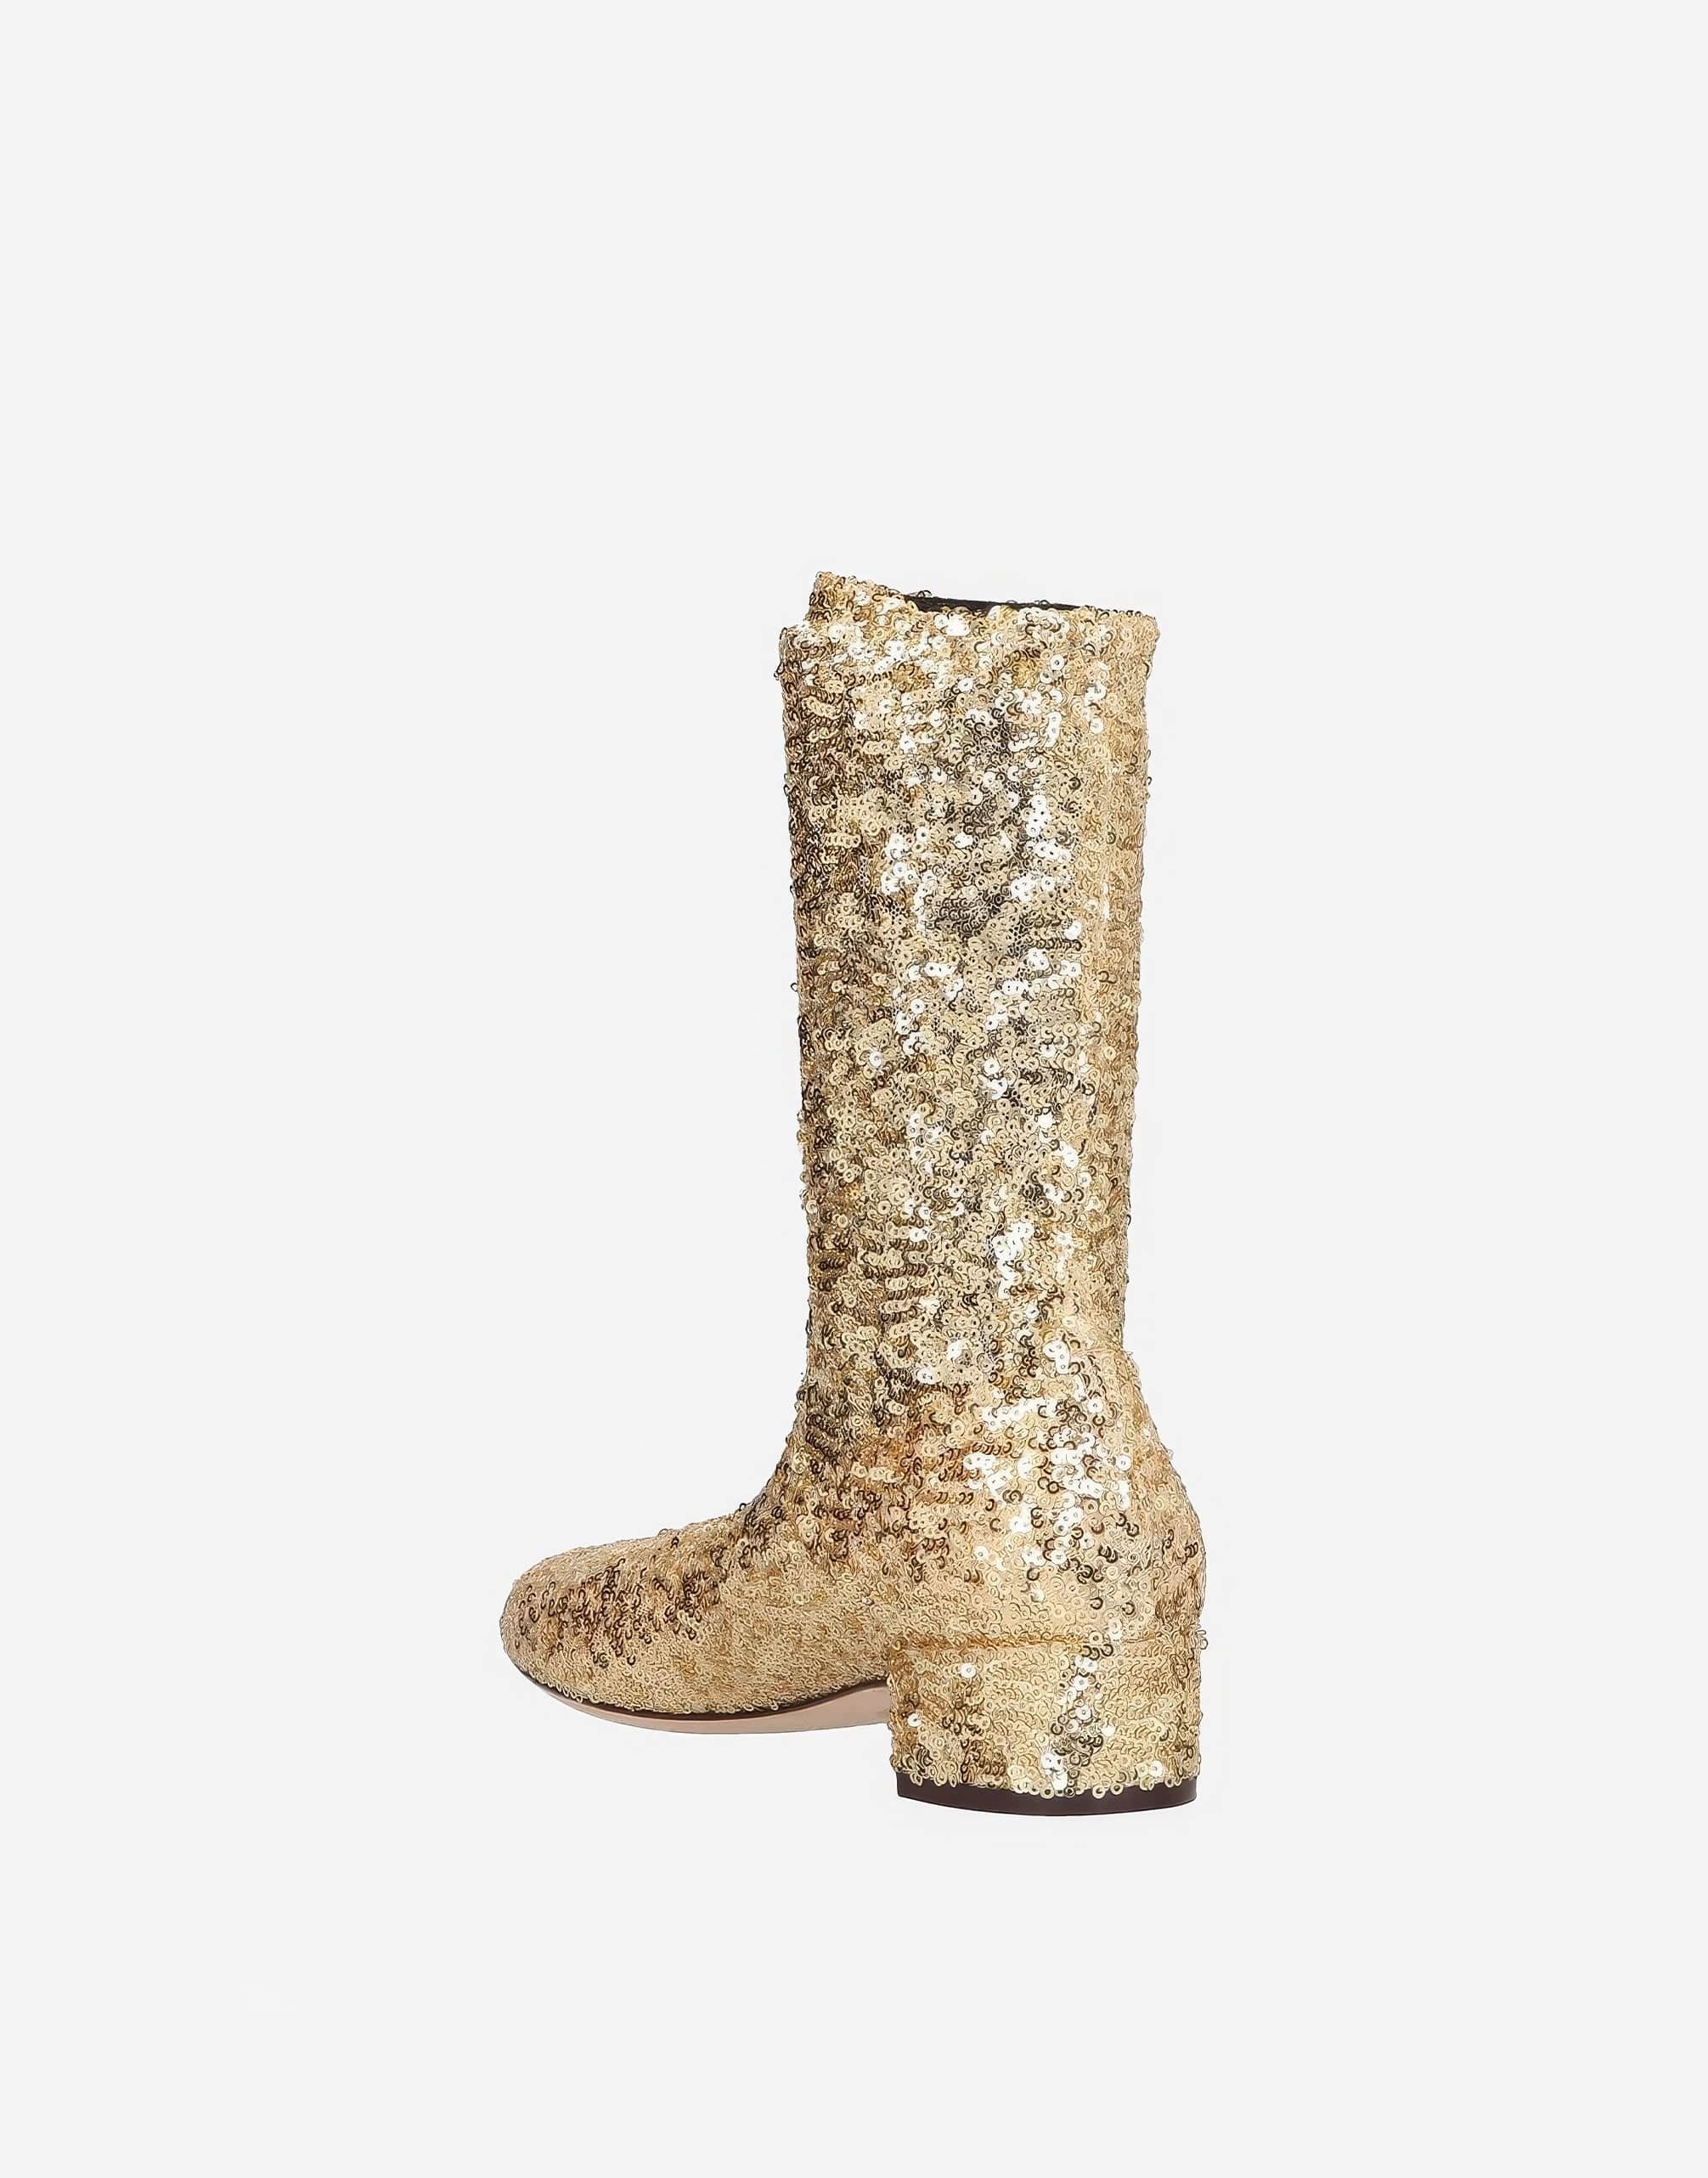 Dolce & Gabbana Sequined Gold Stretch Boots